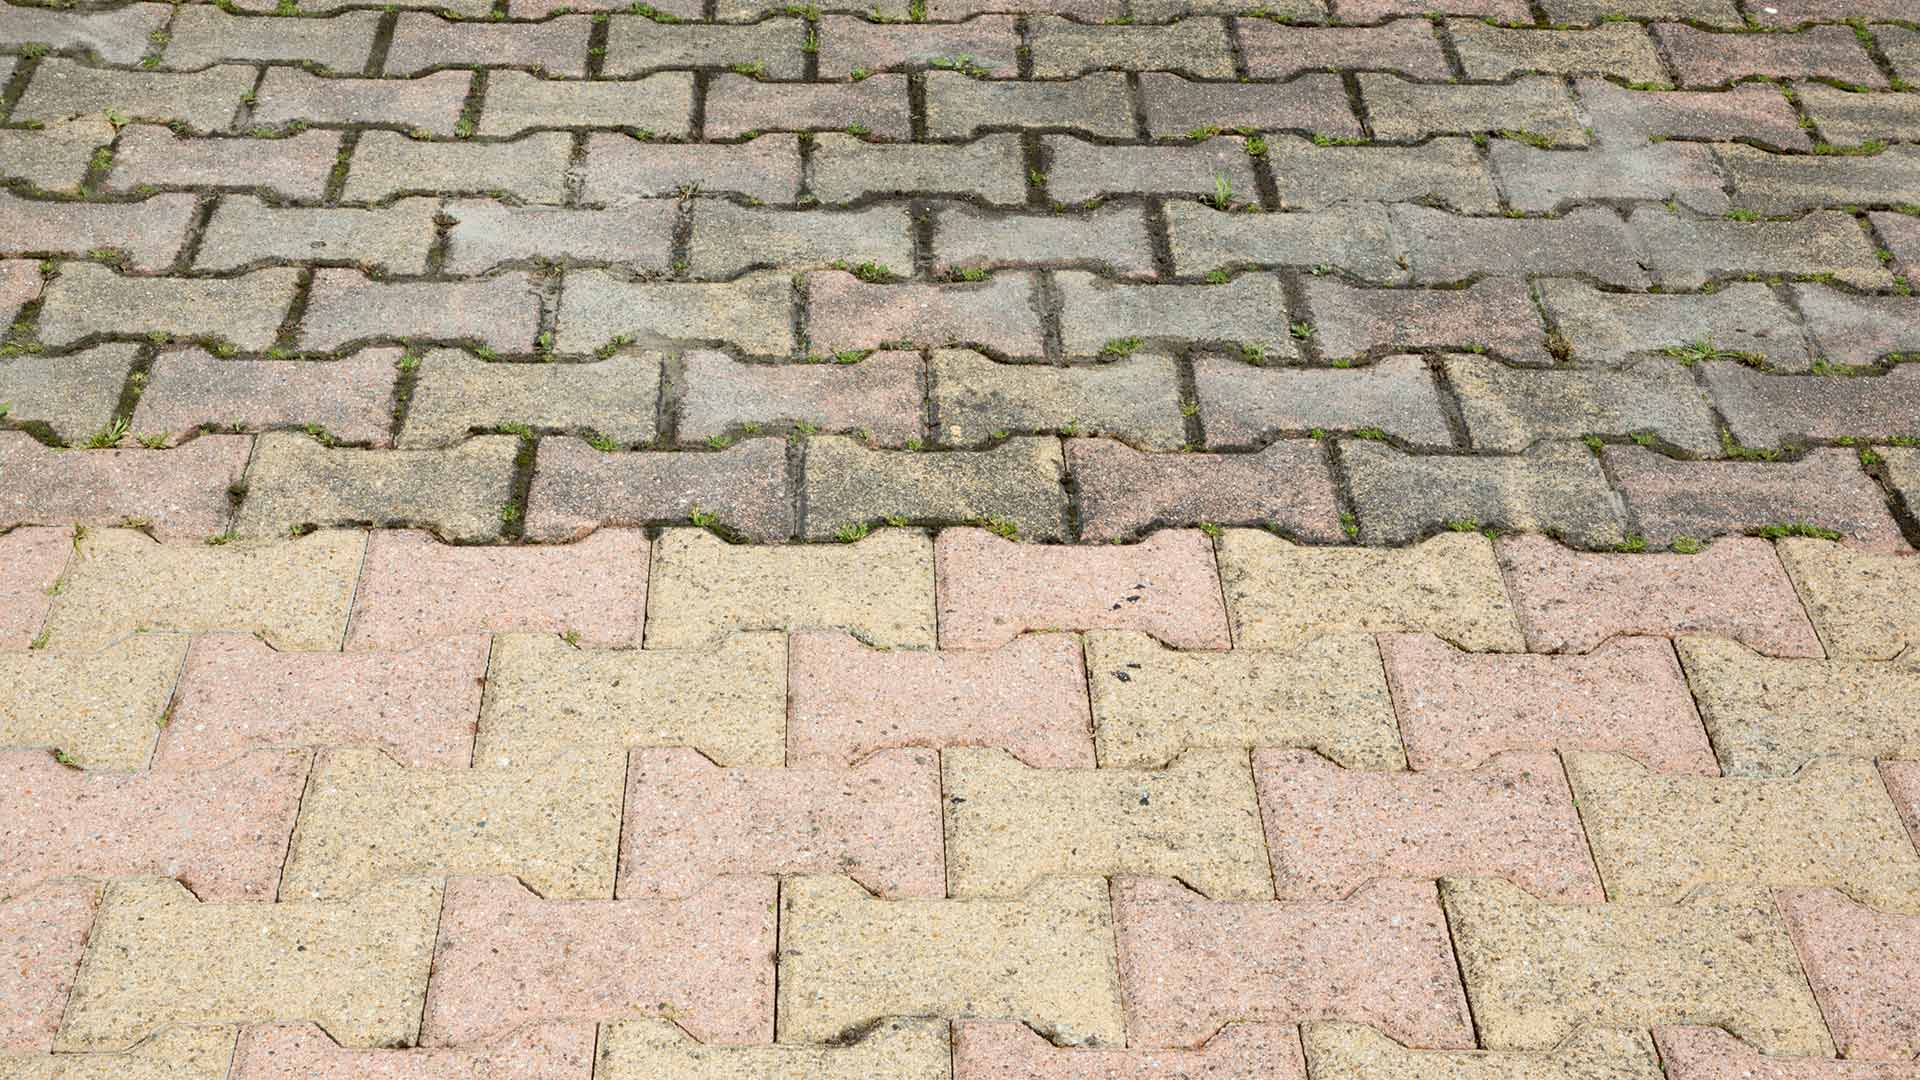 Cleaning & Sealing Your Pavers - Is It Really Worth It?